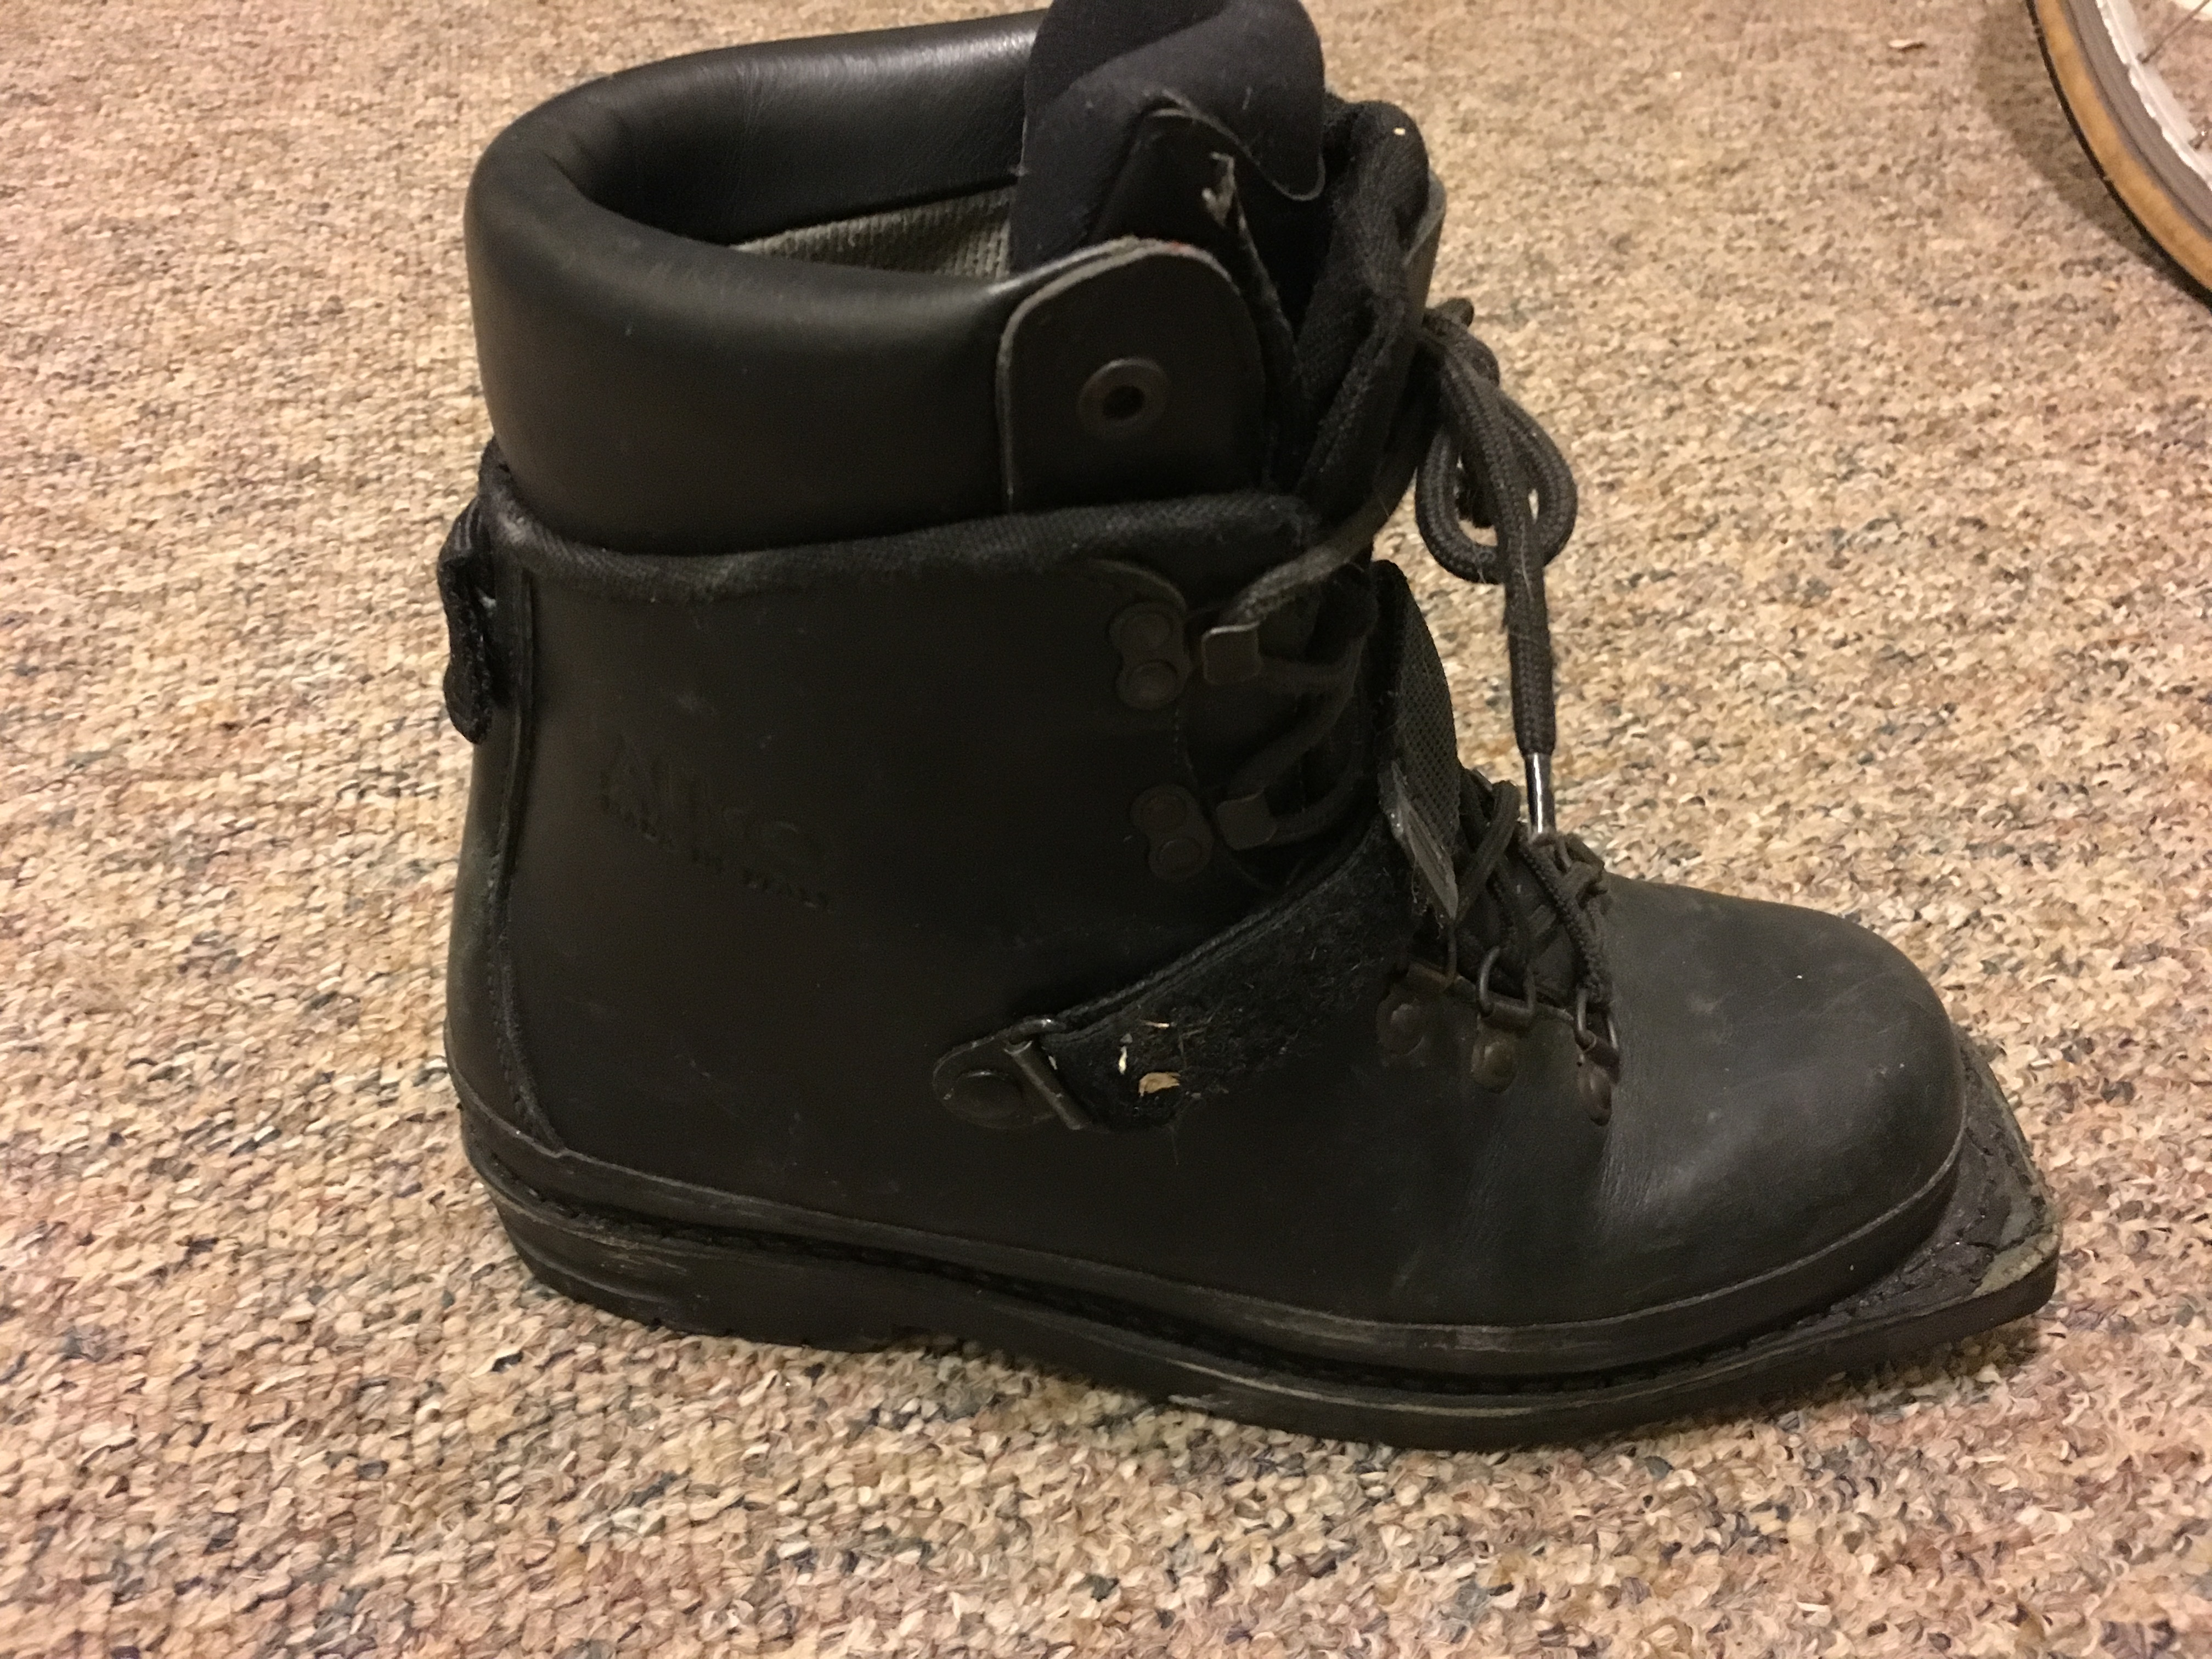 WTB: Leather Telemark Boots 10.5